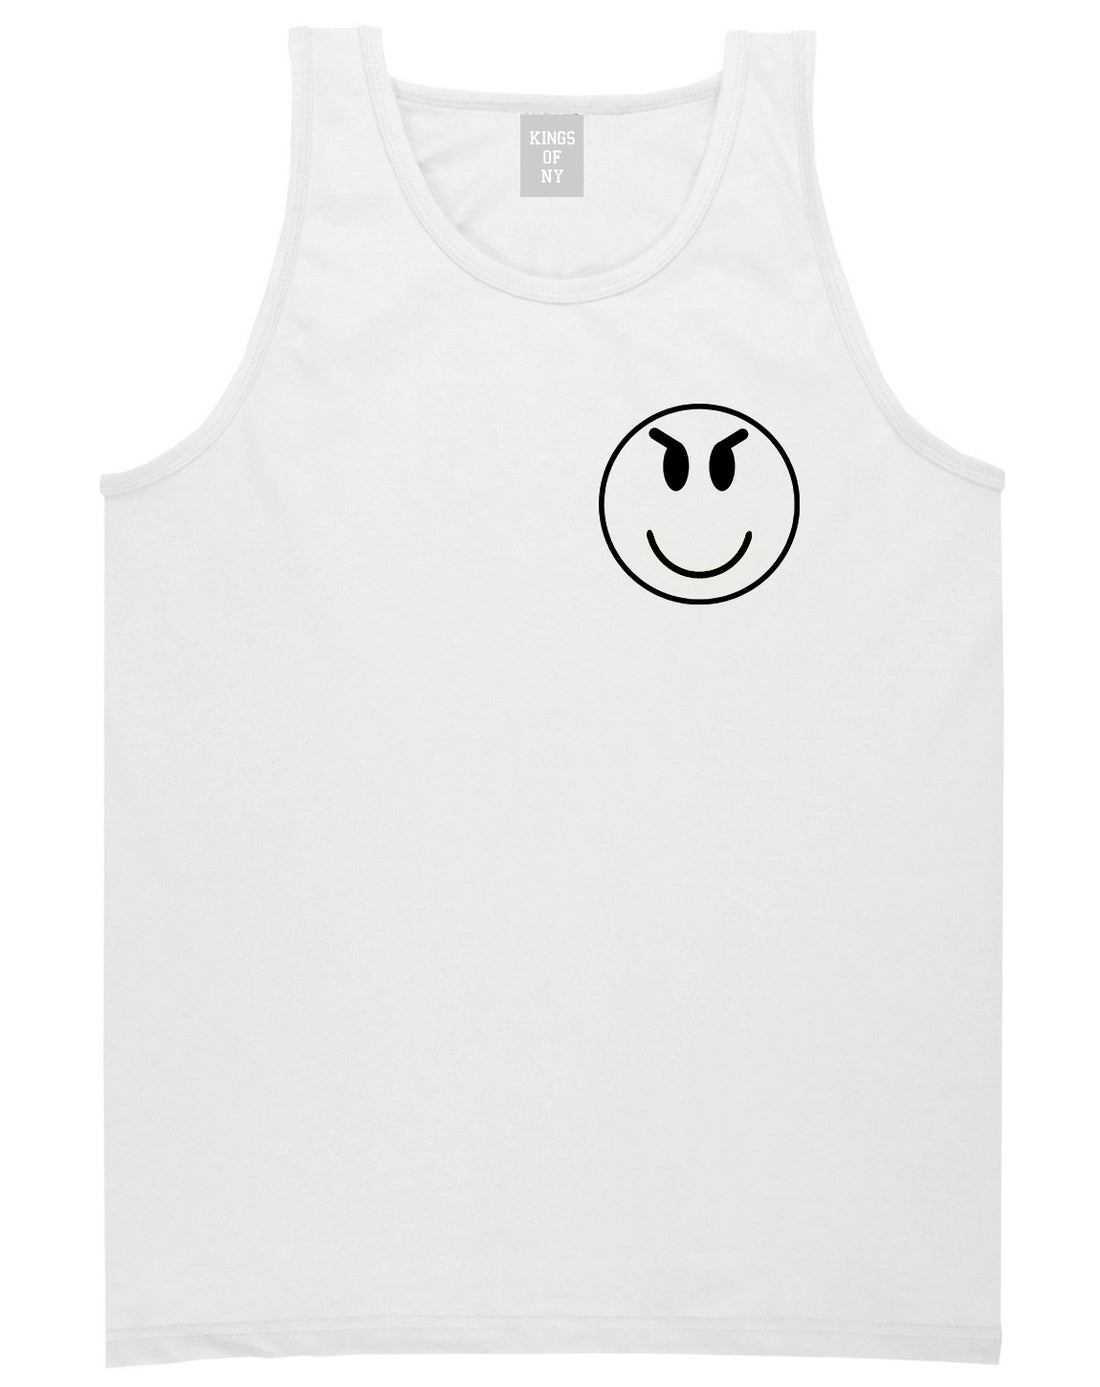 Evil Face Emoji Chest Mens White Tank Top Shirt by KINGS OF NY